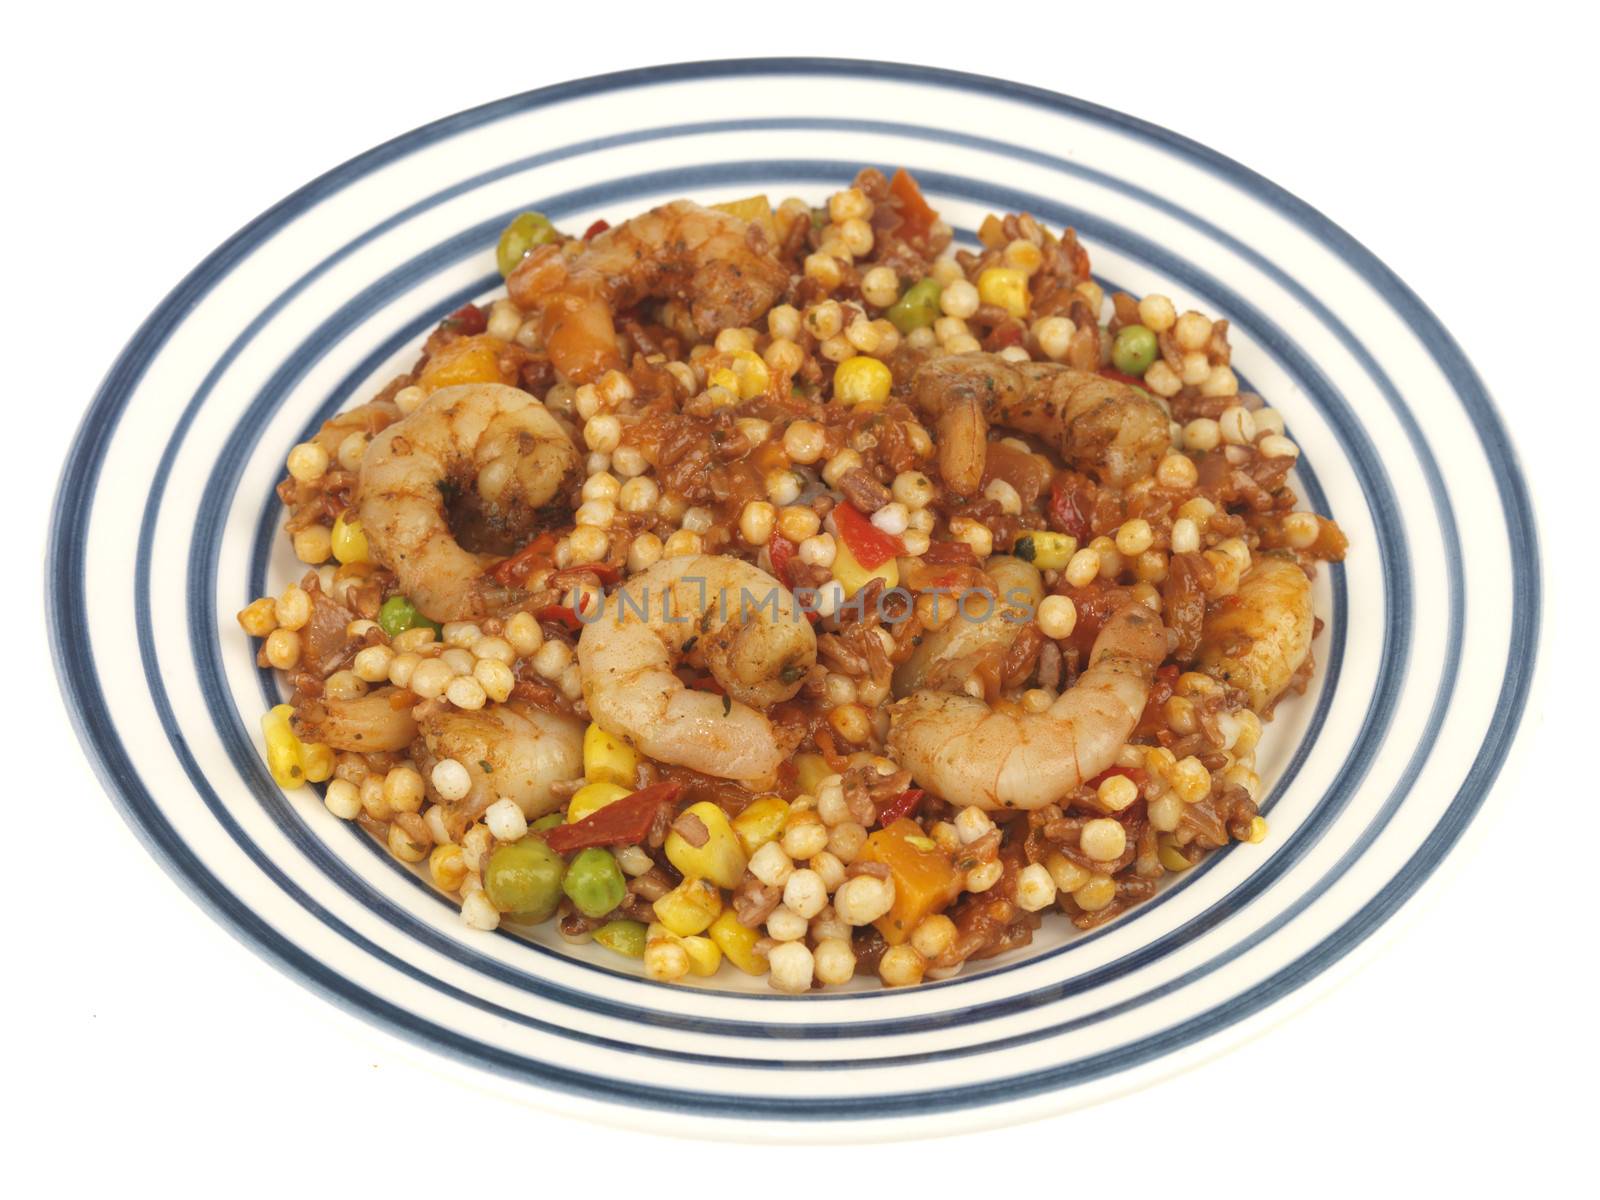 Prawns with Couscous